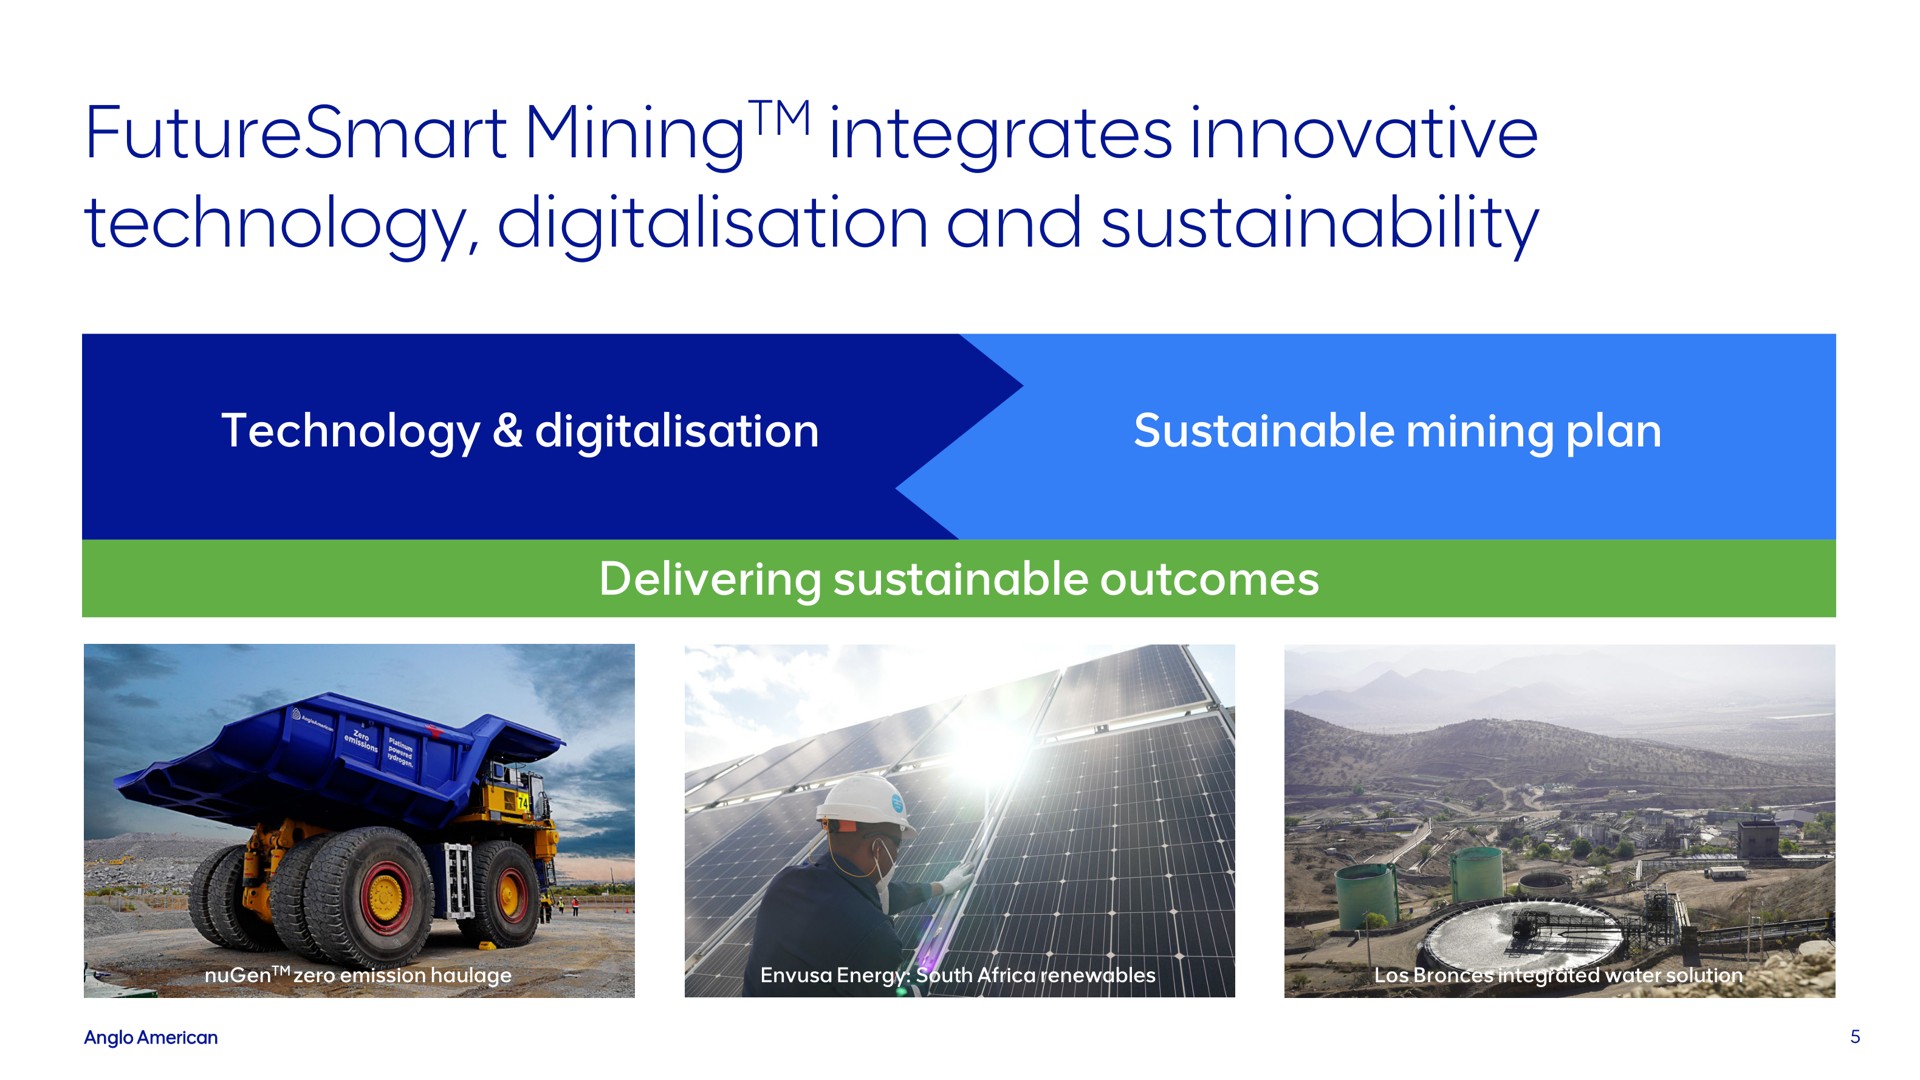 integrates innovative technology and mining | AngloAmerican